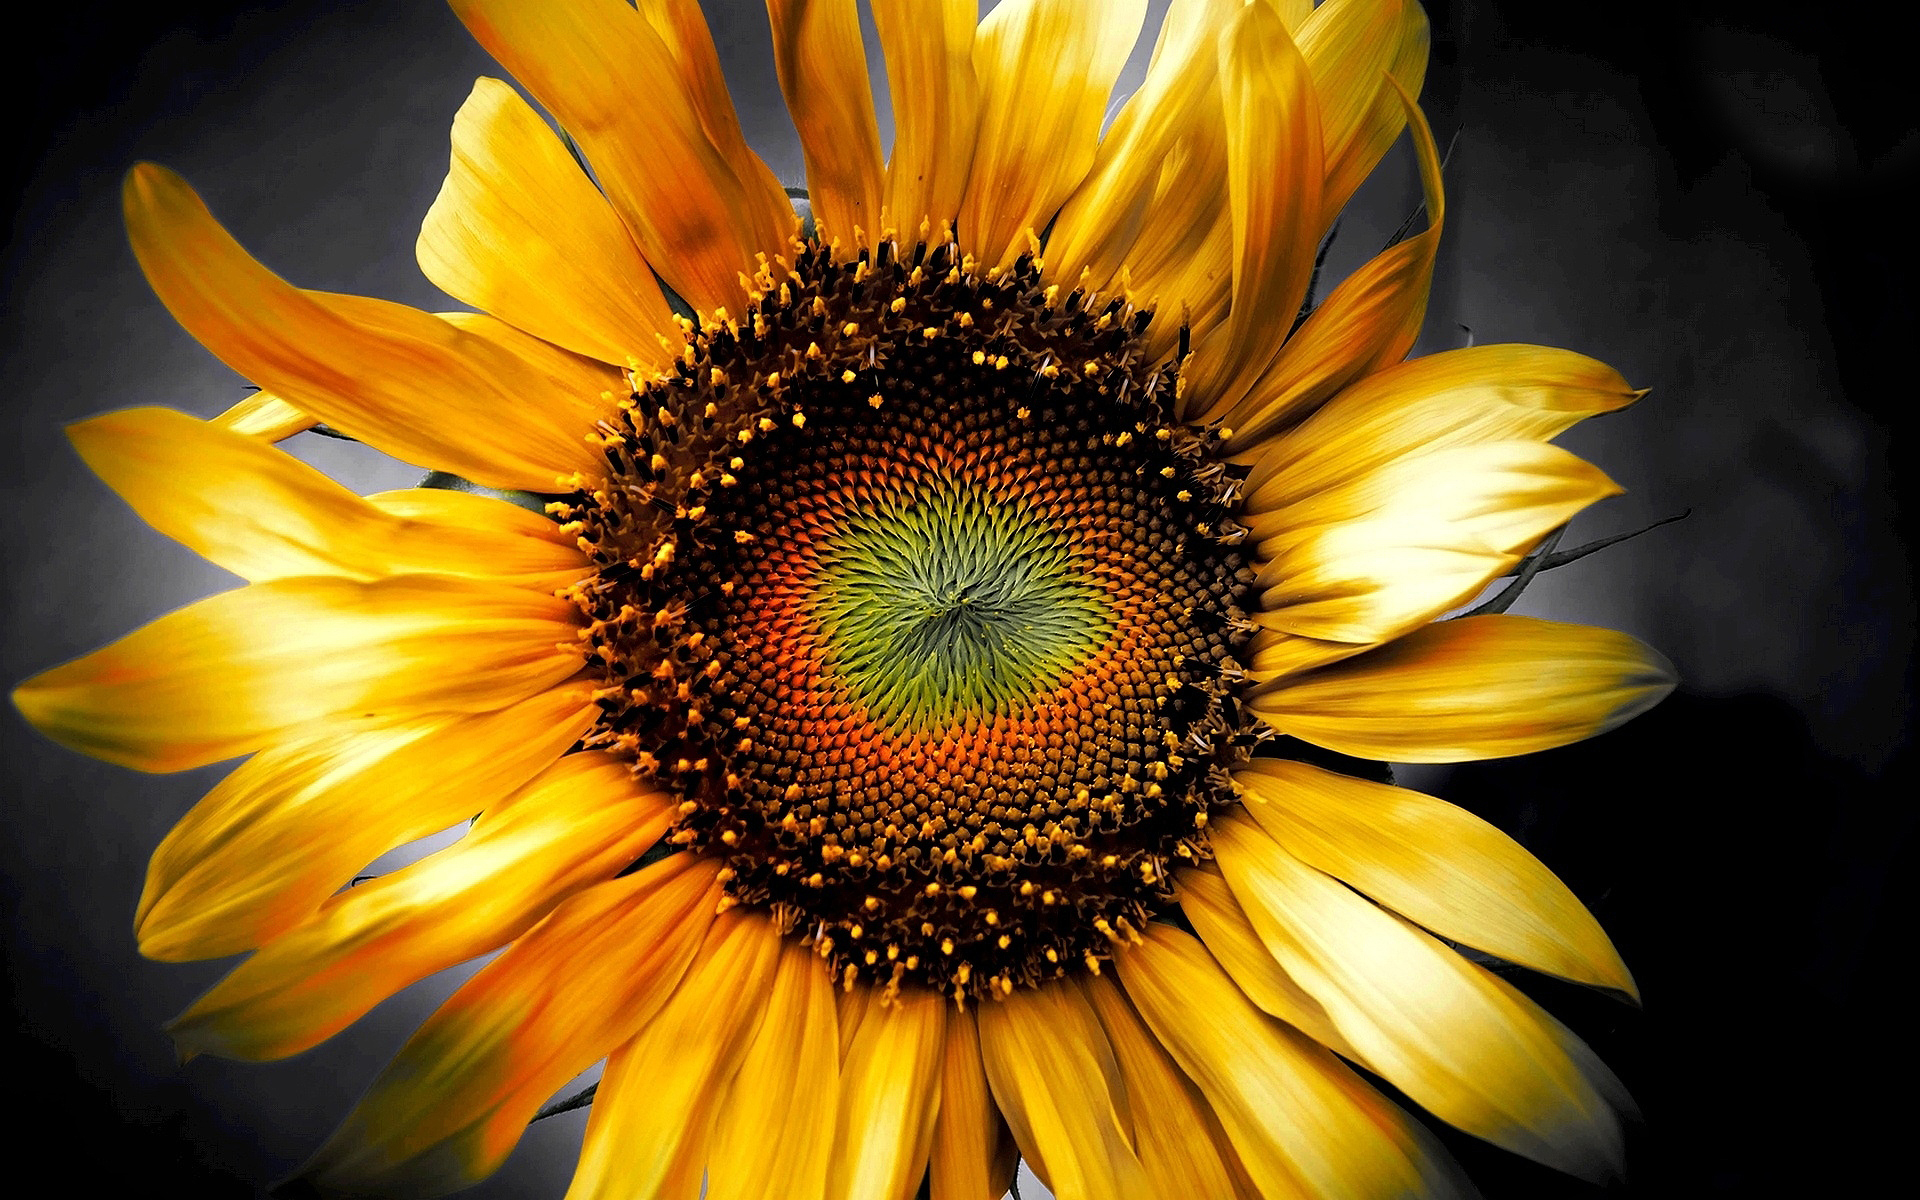 SUnflower Art Wallpapers Pictures Photos Images. «